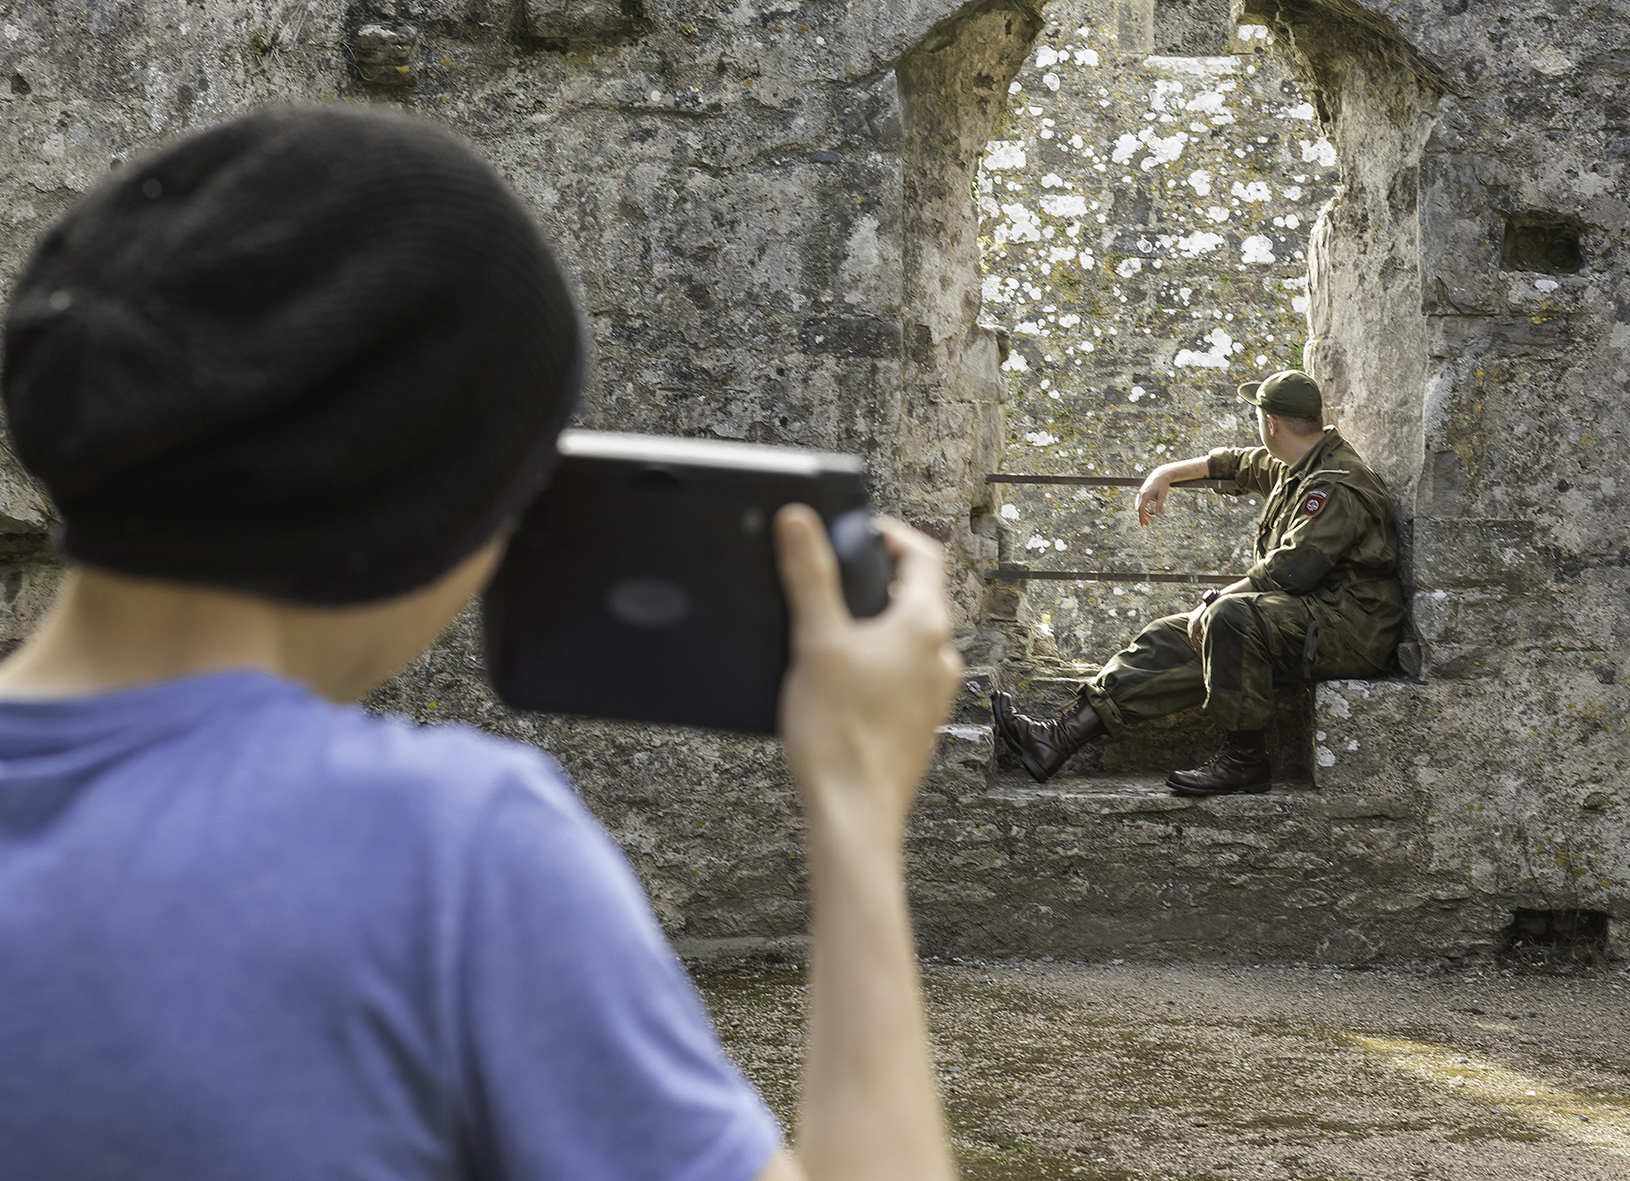 Young person taking photo of another person in uniform